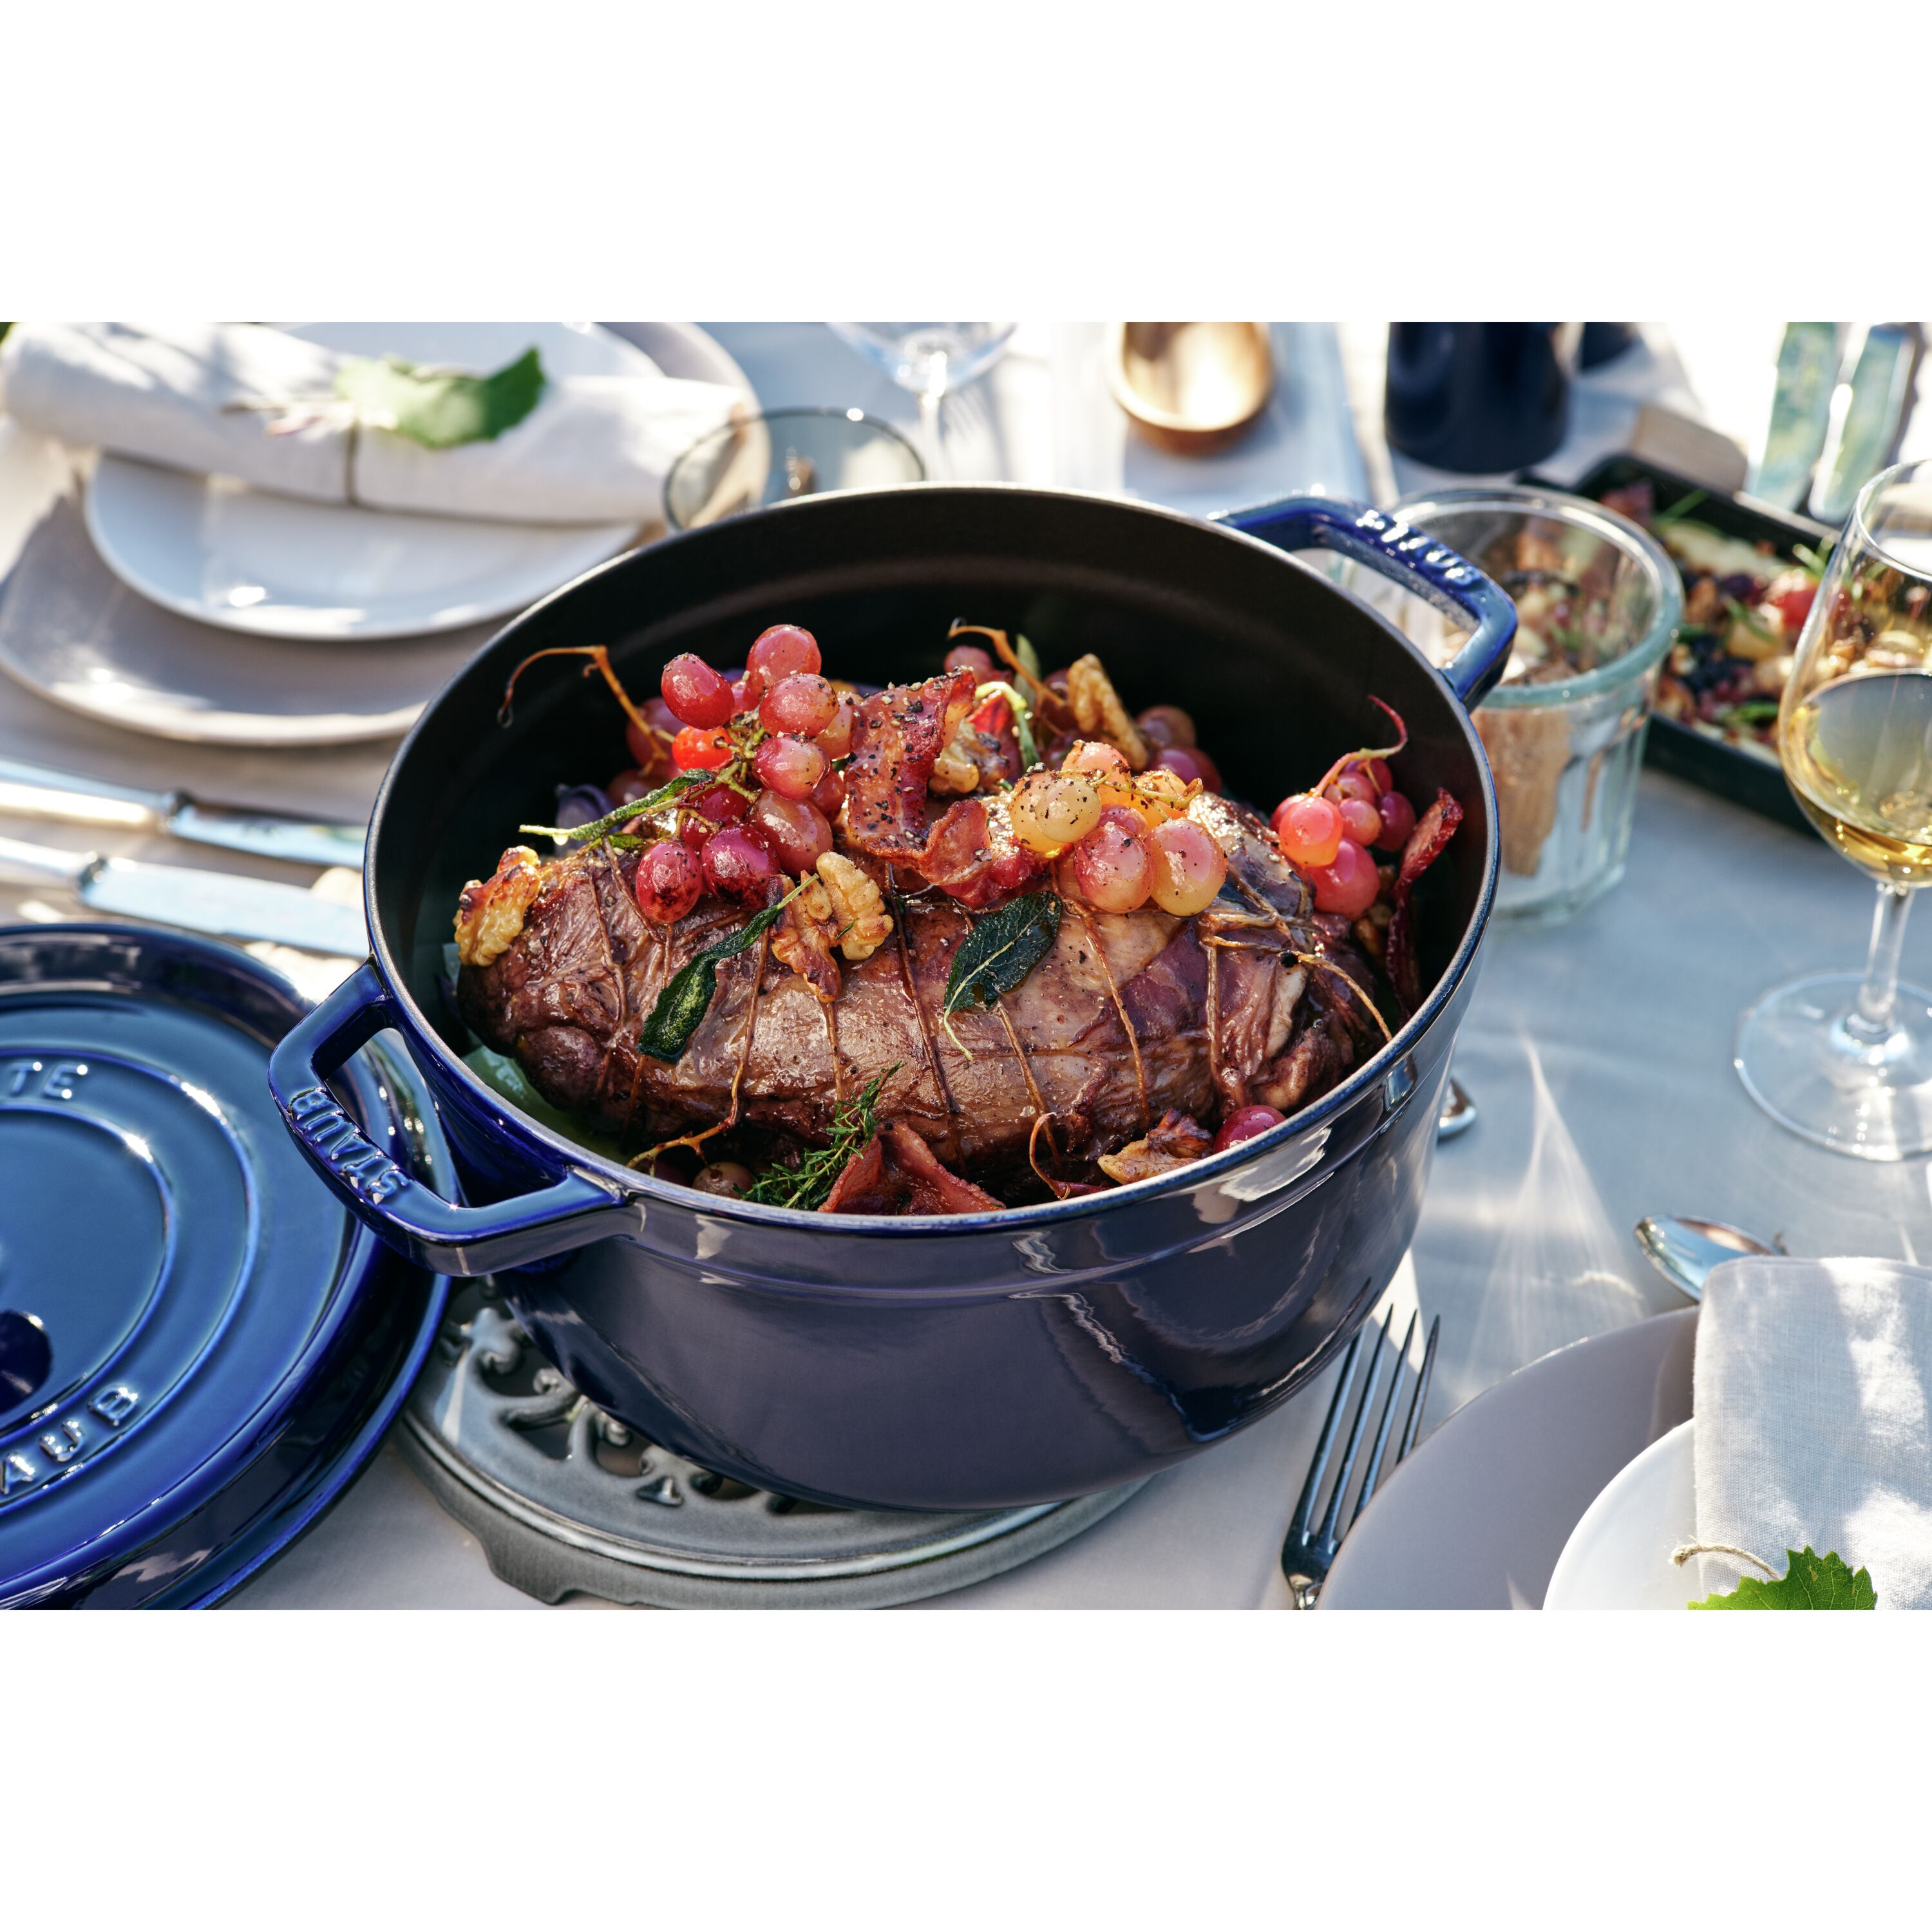 Staub Cast Iron Round Cocotte, Dutch Oven, 5.5-quart, serves 5-6, Made in  France, Cherry, 5.5-qt - Foods Co.